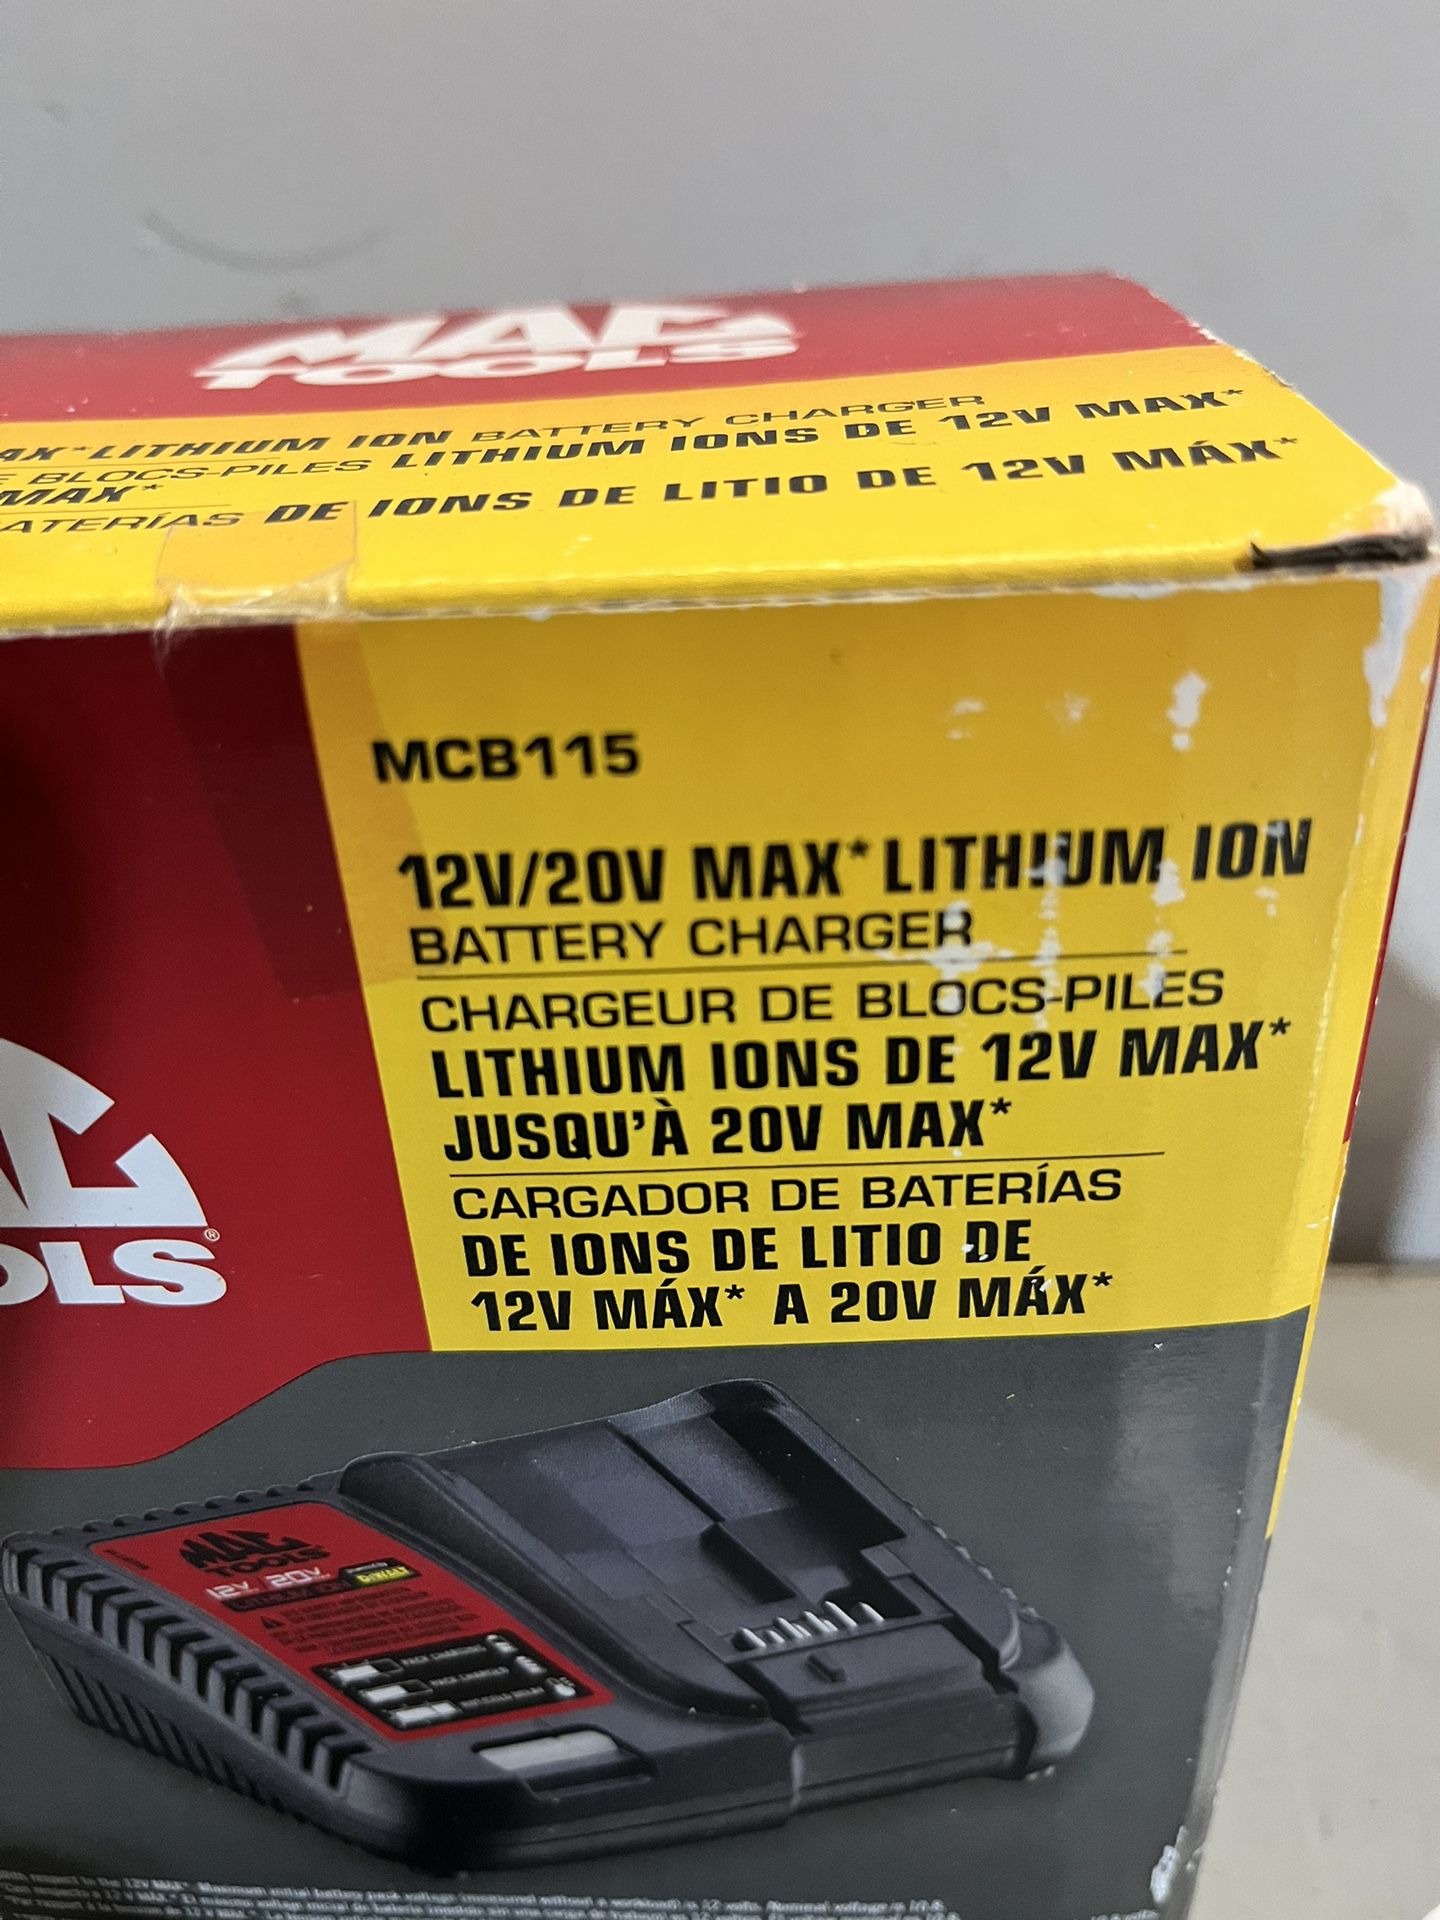 OEM Black & Decker LCS12 12V Max Lithium-ION Power Tool Battery Charger for  Sale in Bloomfield, NJ - OfferUp